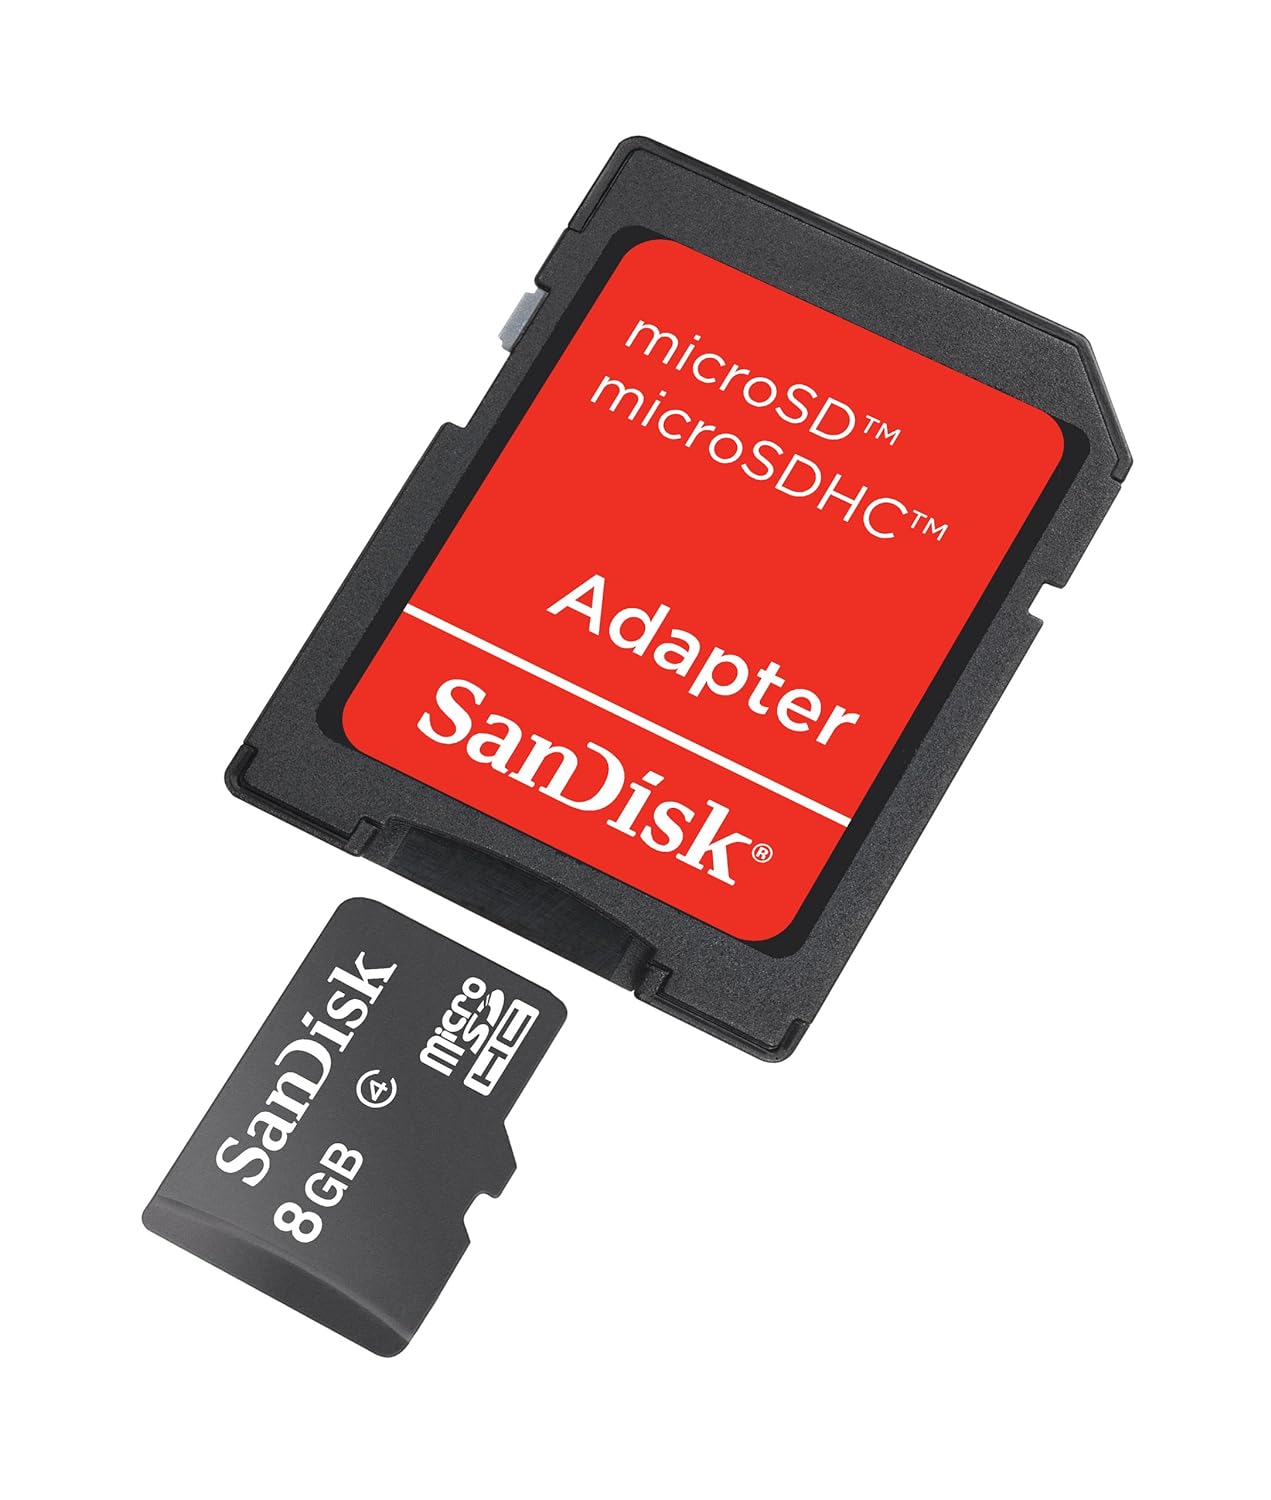 Micro SD card with a drive letter adjustment option